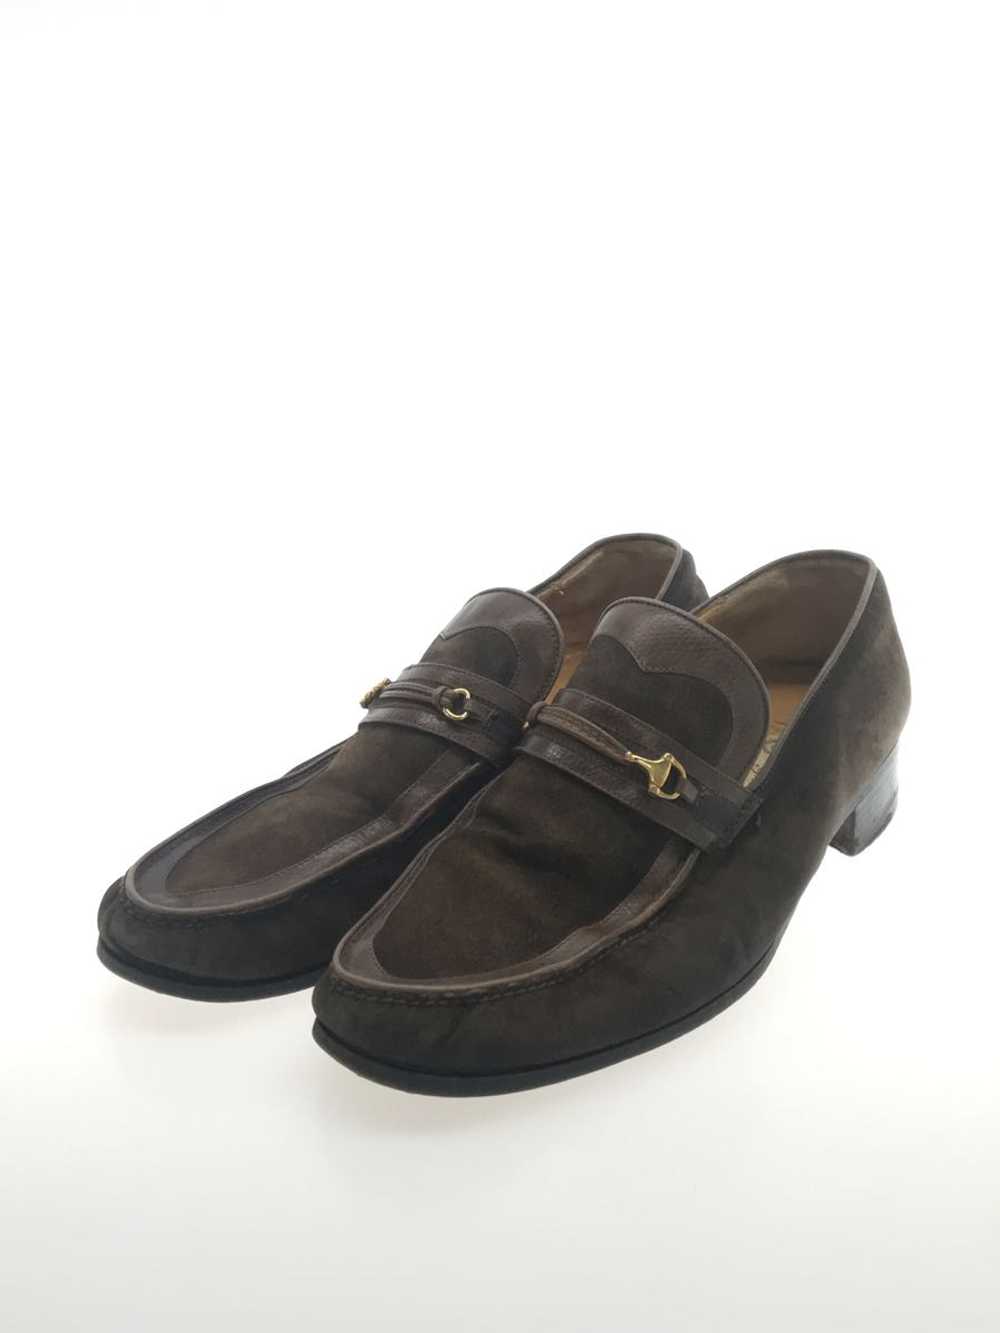 Gucci Bit Loafers/41/Brw/Suede/110 097 0028/60S-7… - image 2